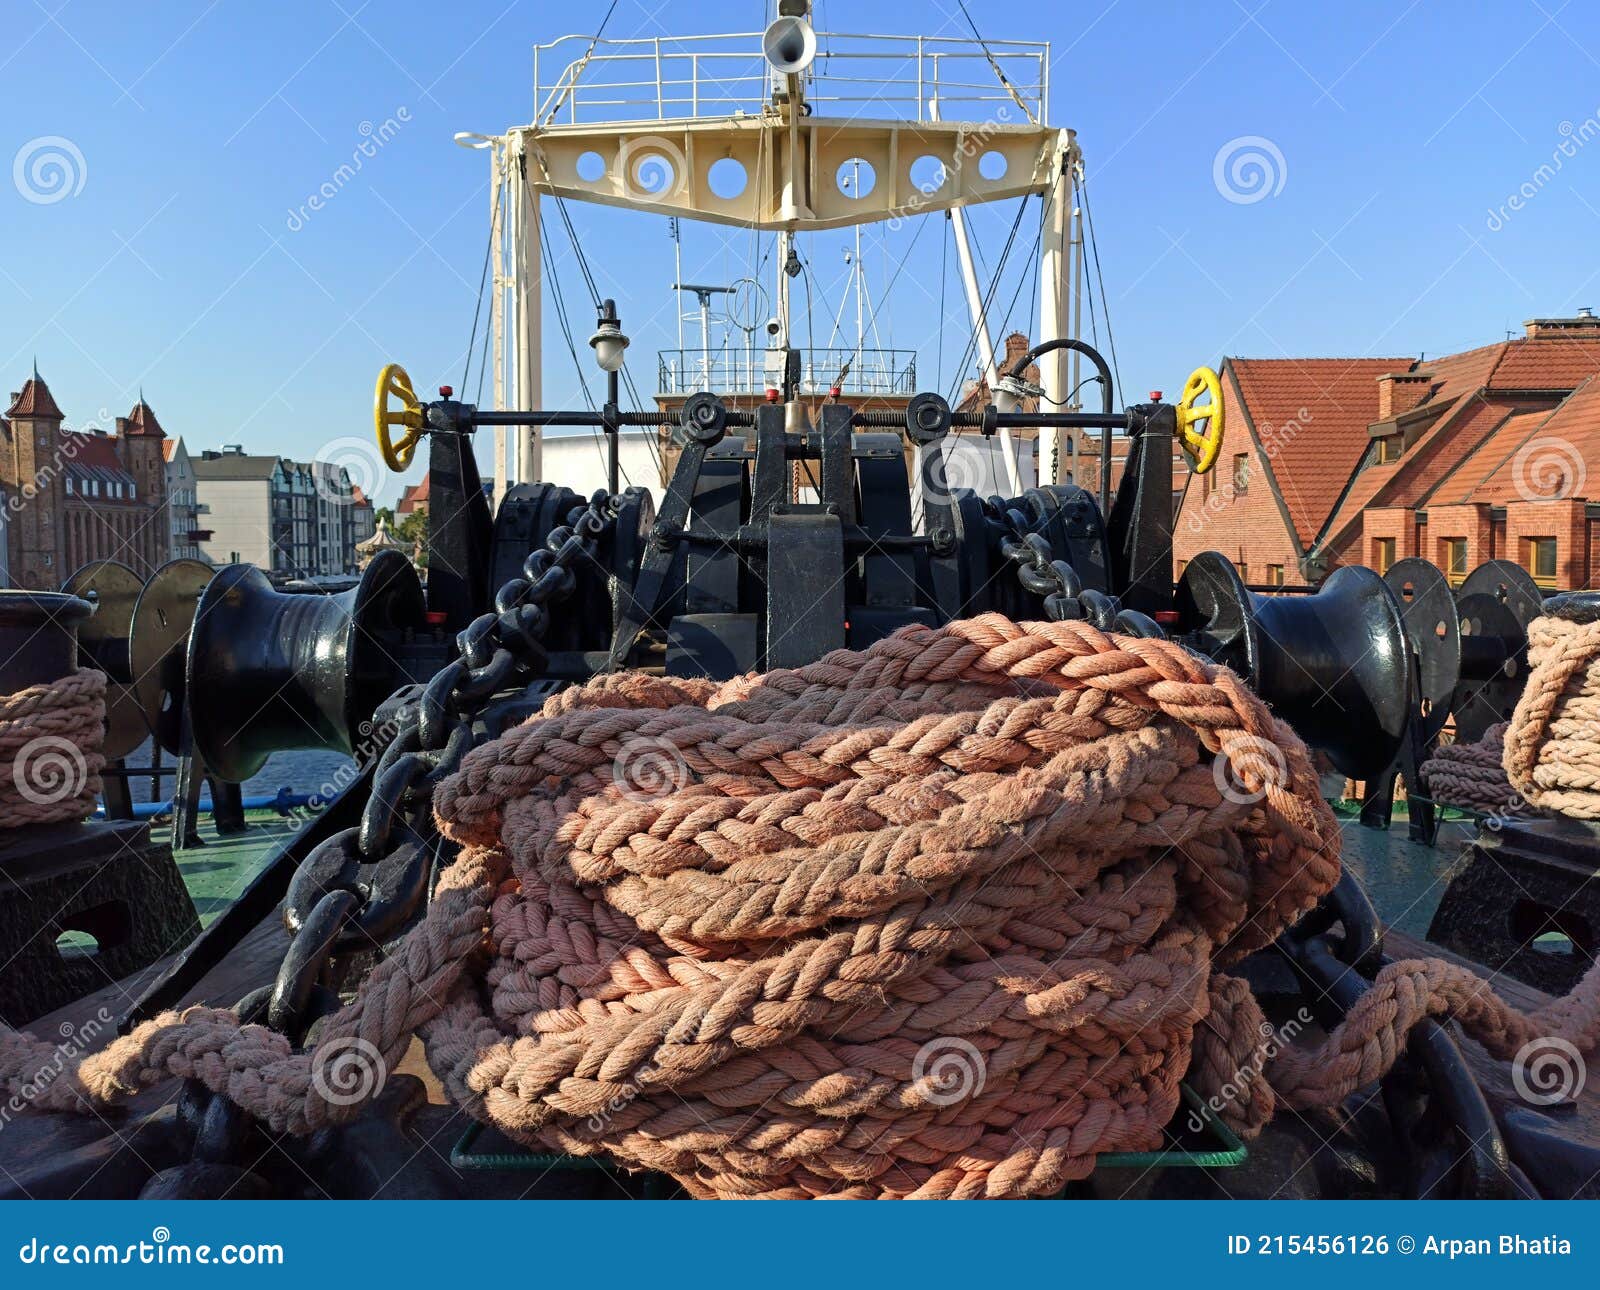 Gdansk, Poland - May 07, 2020: Large Thick Rope Used To Moor a Ship. Round  Wound Around a Mooring Bollards To Hold a Ship Piled Stock Photo - Image of  stable, water: 215456126